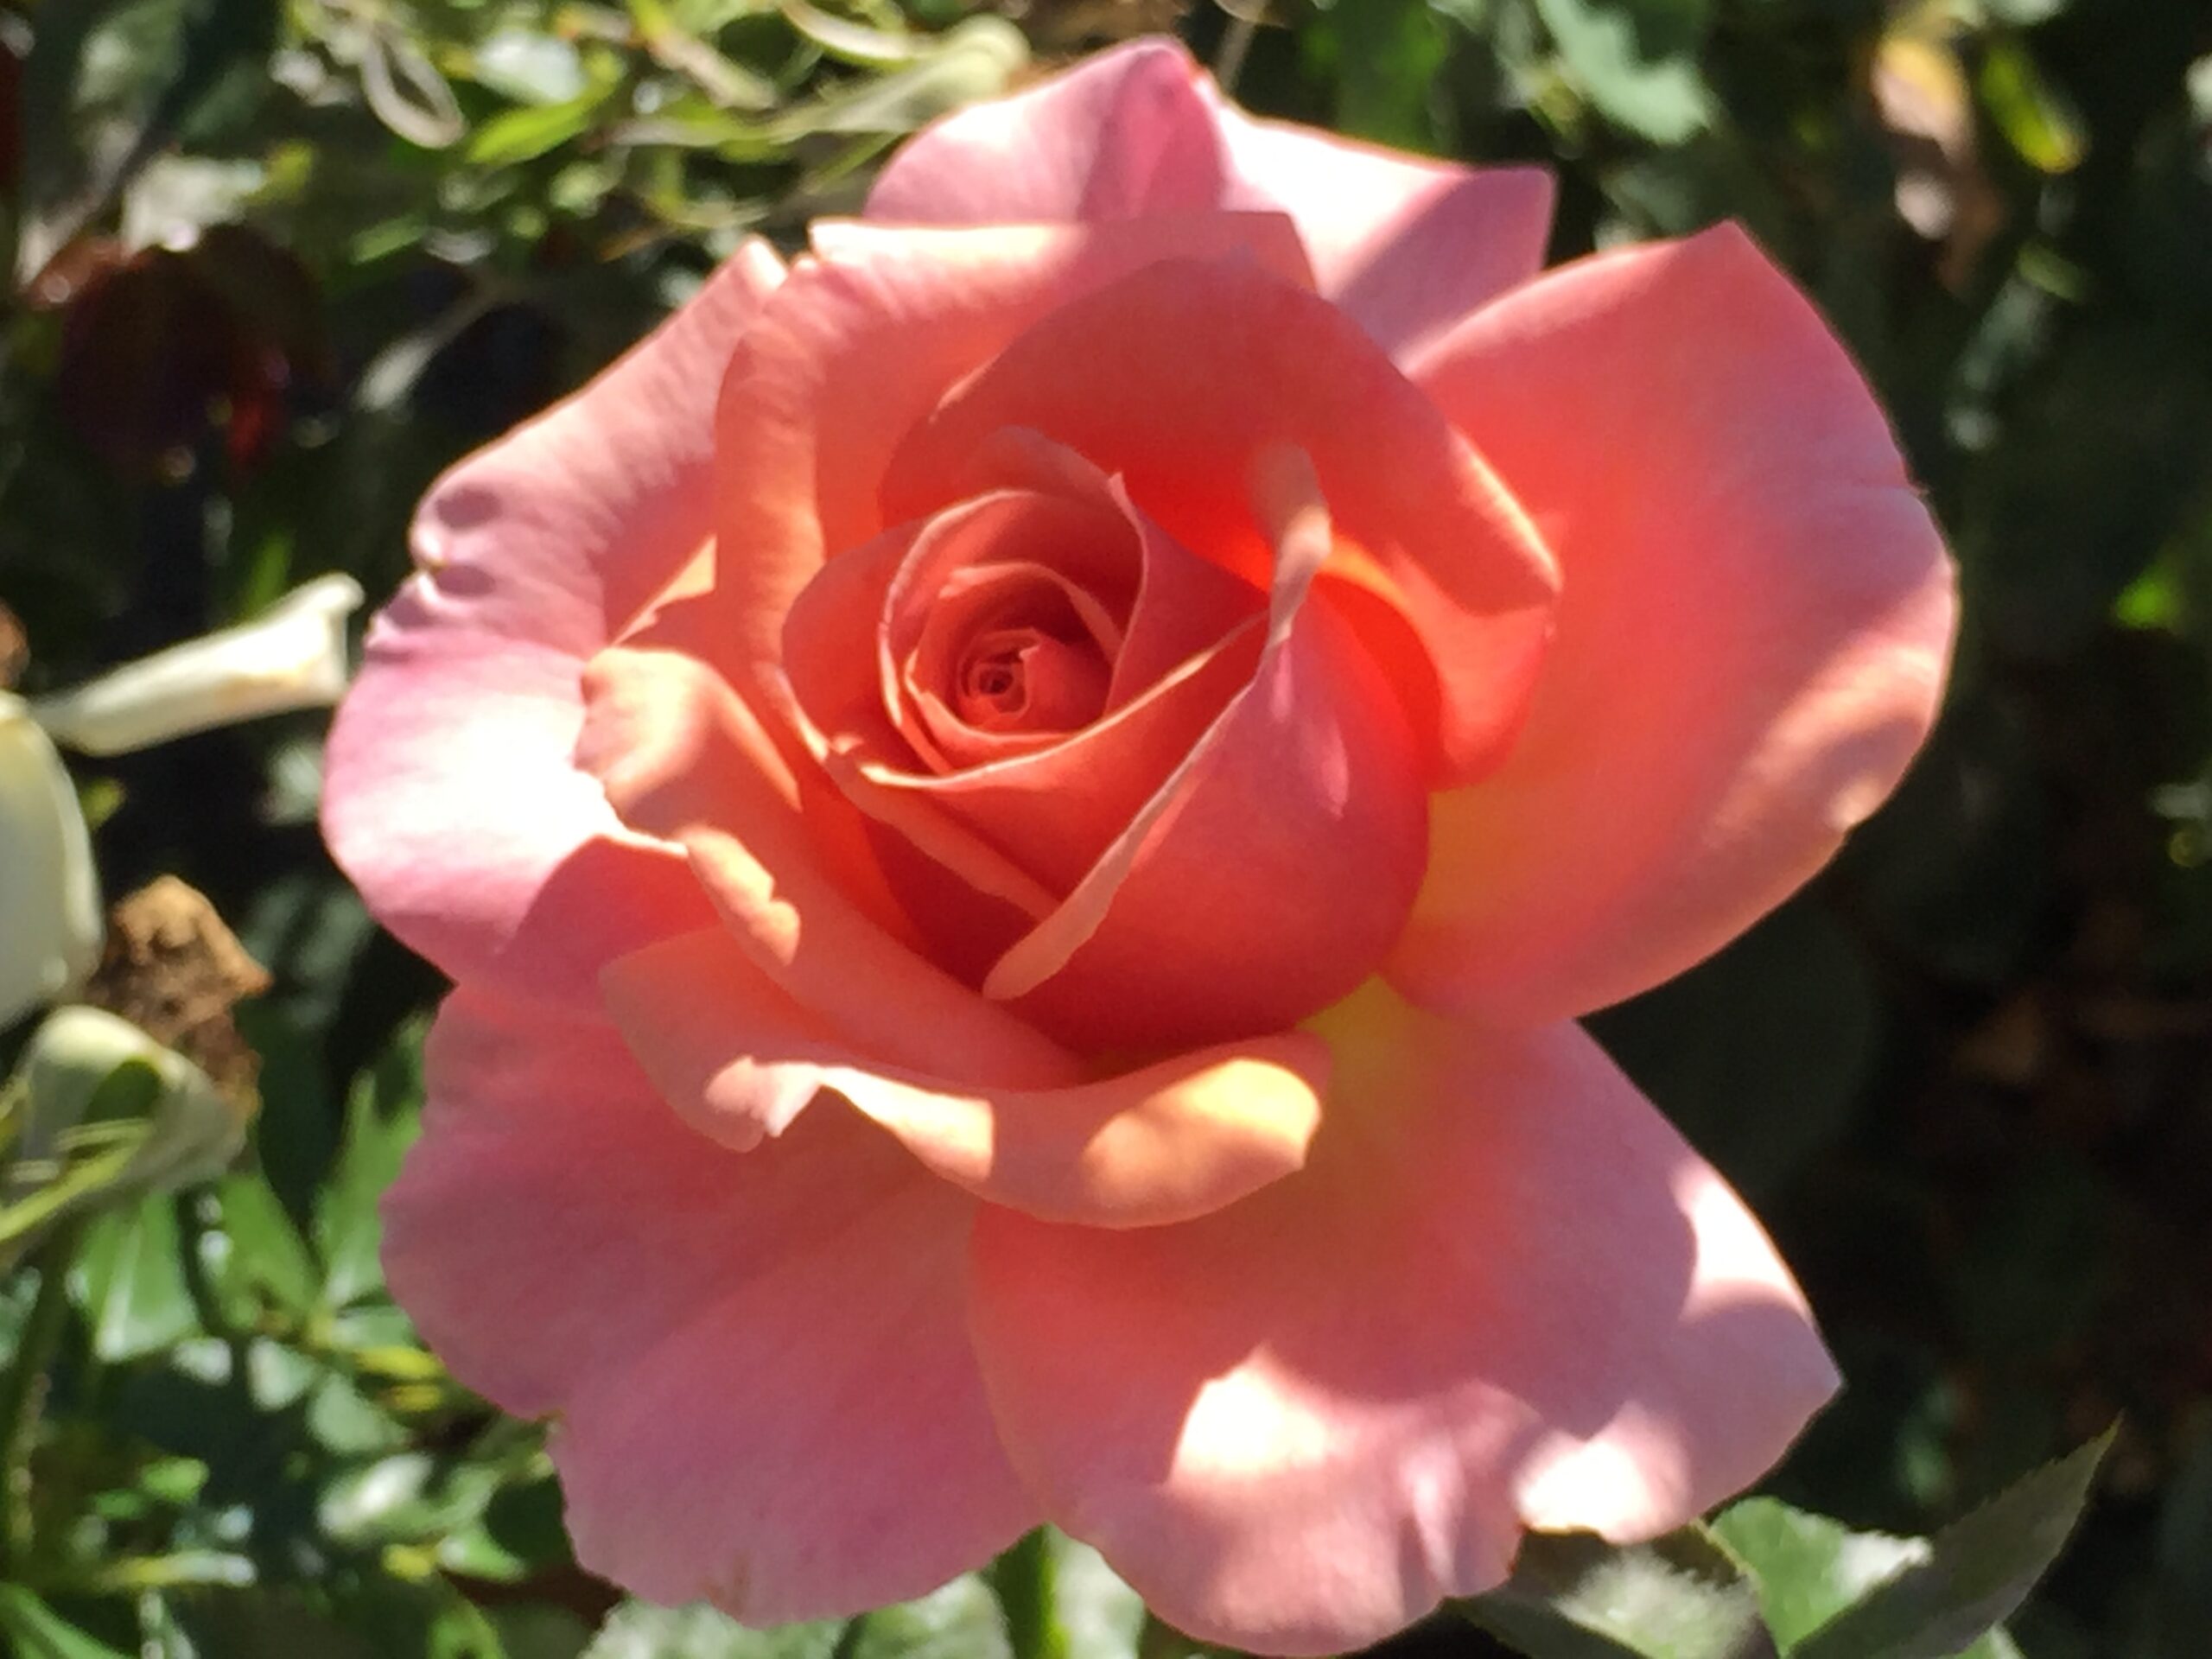 A pink rose with yellow center in the sun.